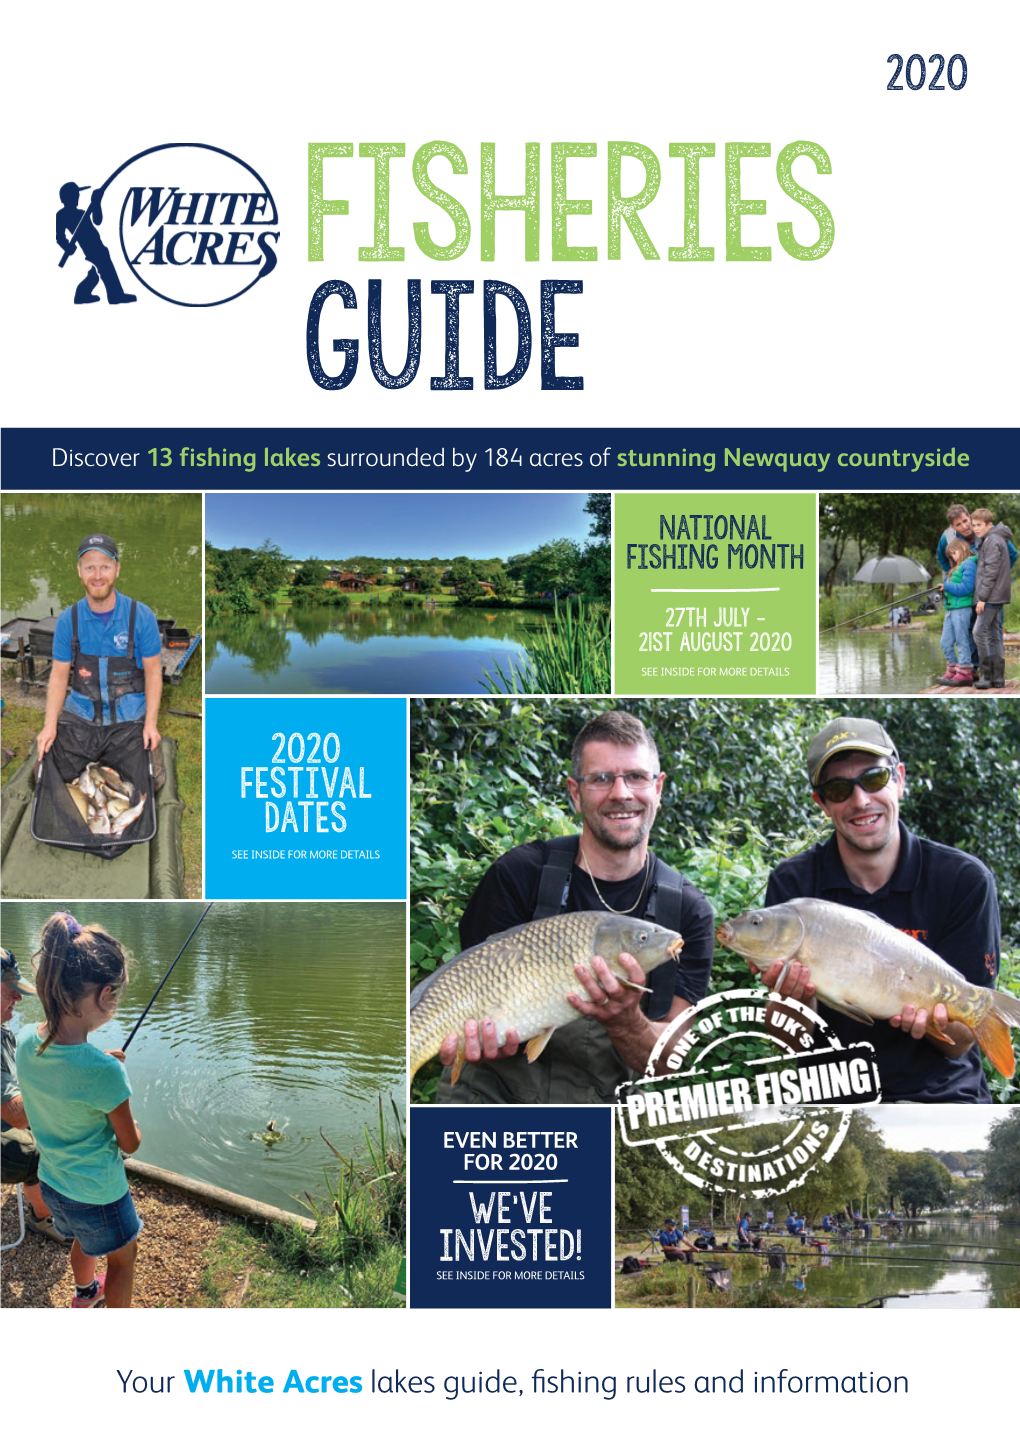 Fisheries Guide Discover 13 Fishing Lakes Surrounded by 184 Acres of Stunning Newquay Countryside